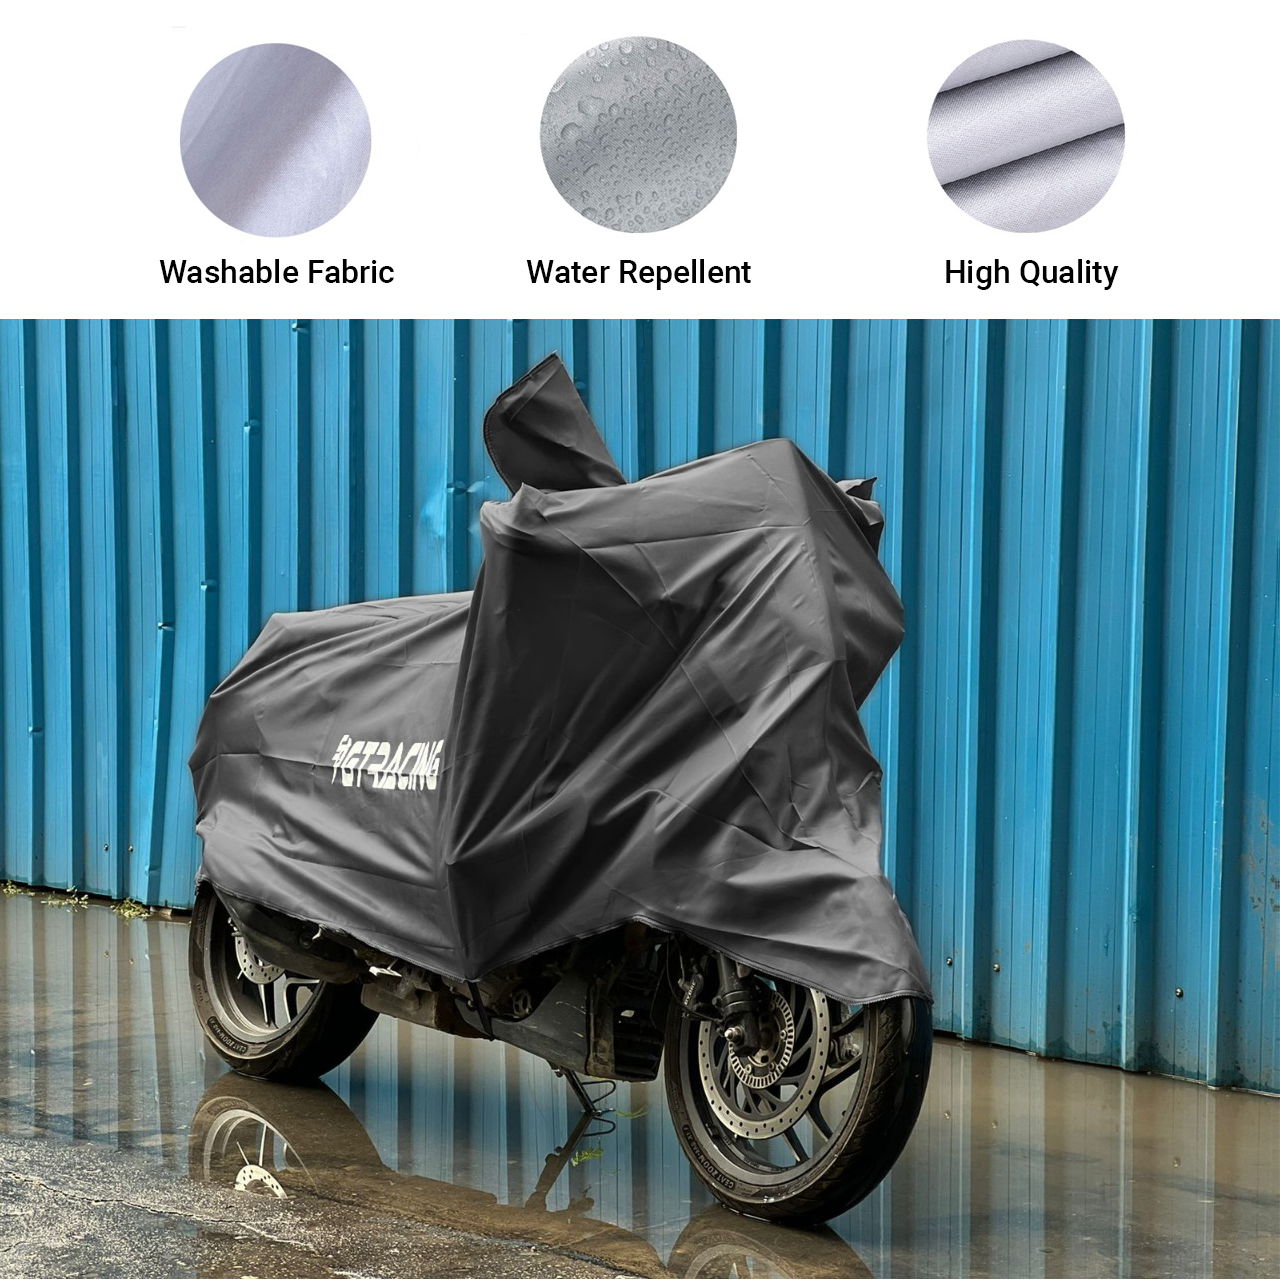 Steelbird Bike Cover GT Racing UV Protection Water-Resistant & Dustproof (2X2 Grey), Bike Body Cover With Carry Bag (All Scooter Activa Electric Scooty Size)